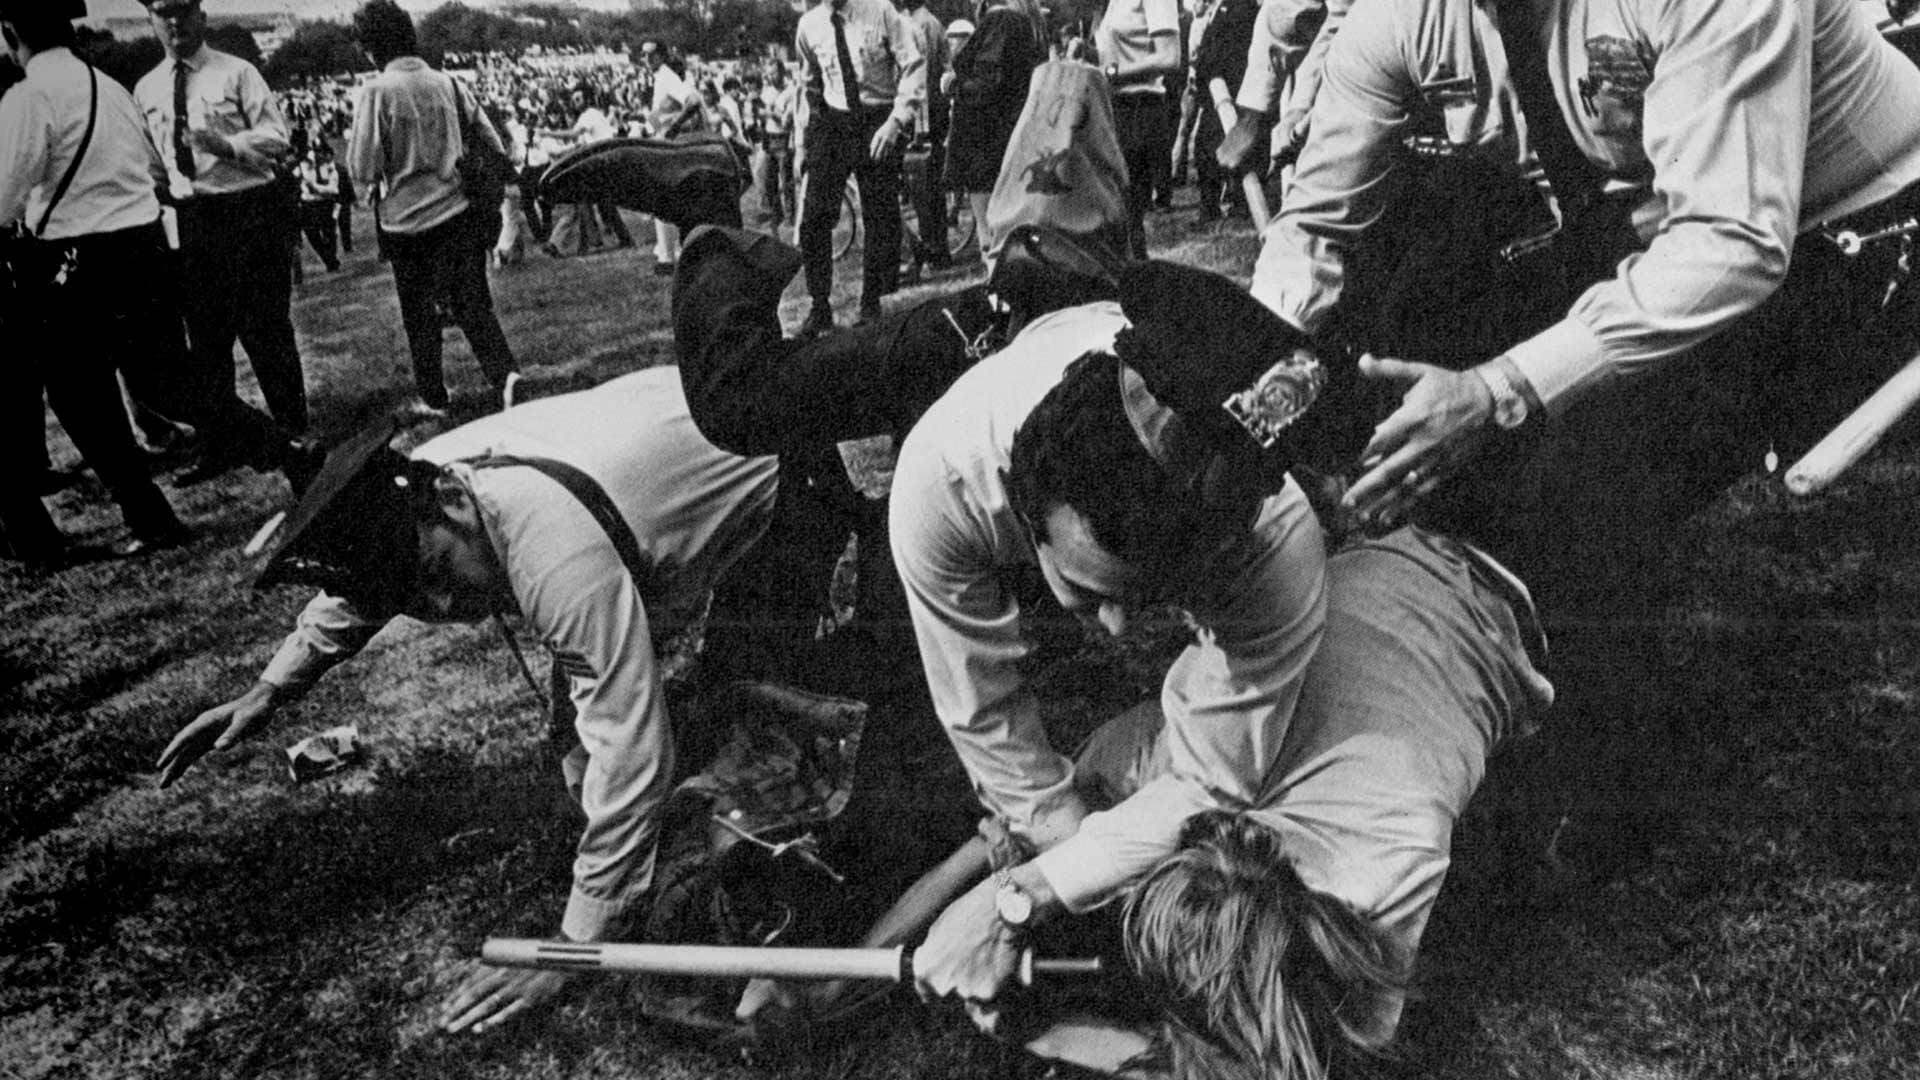 Police Tackling Student During Riot1971 1920x1080